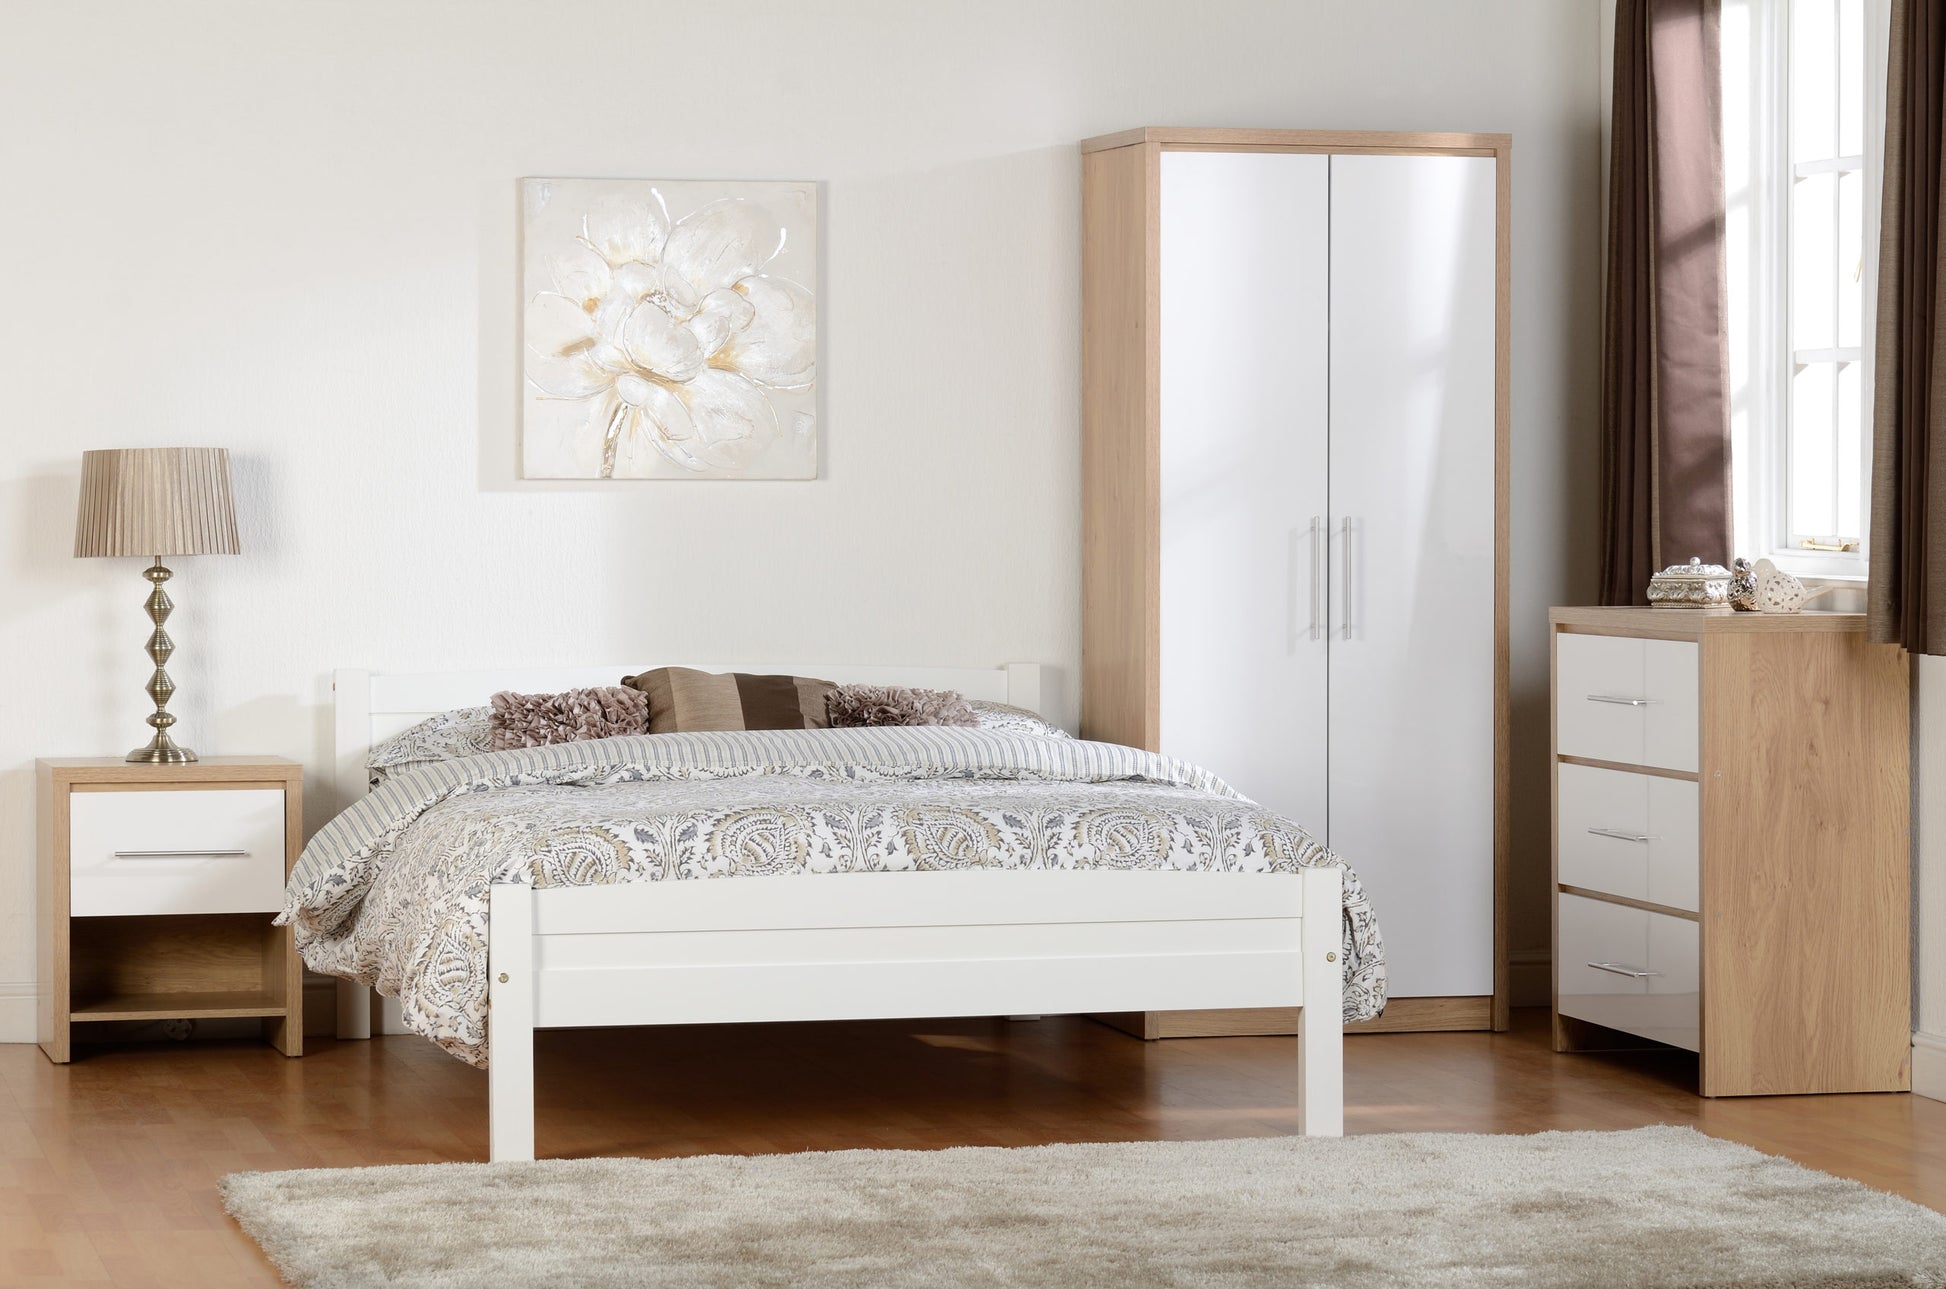  Bedroom picture with Seville 2 Door Wardrobe, chest of drawers and bedside locker - White High Gloss/Light Oak Effect Veneer